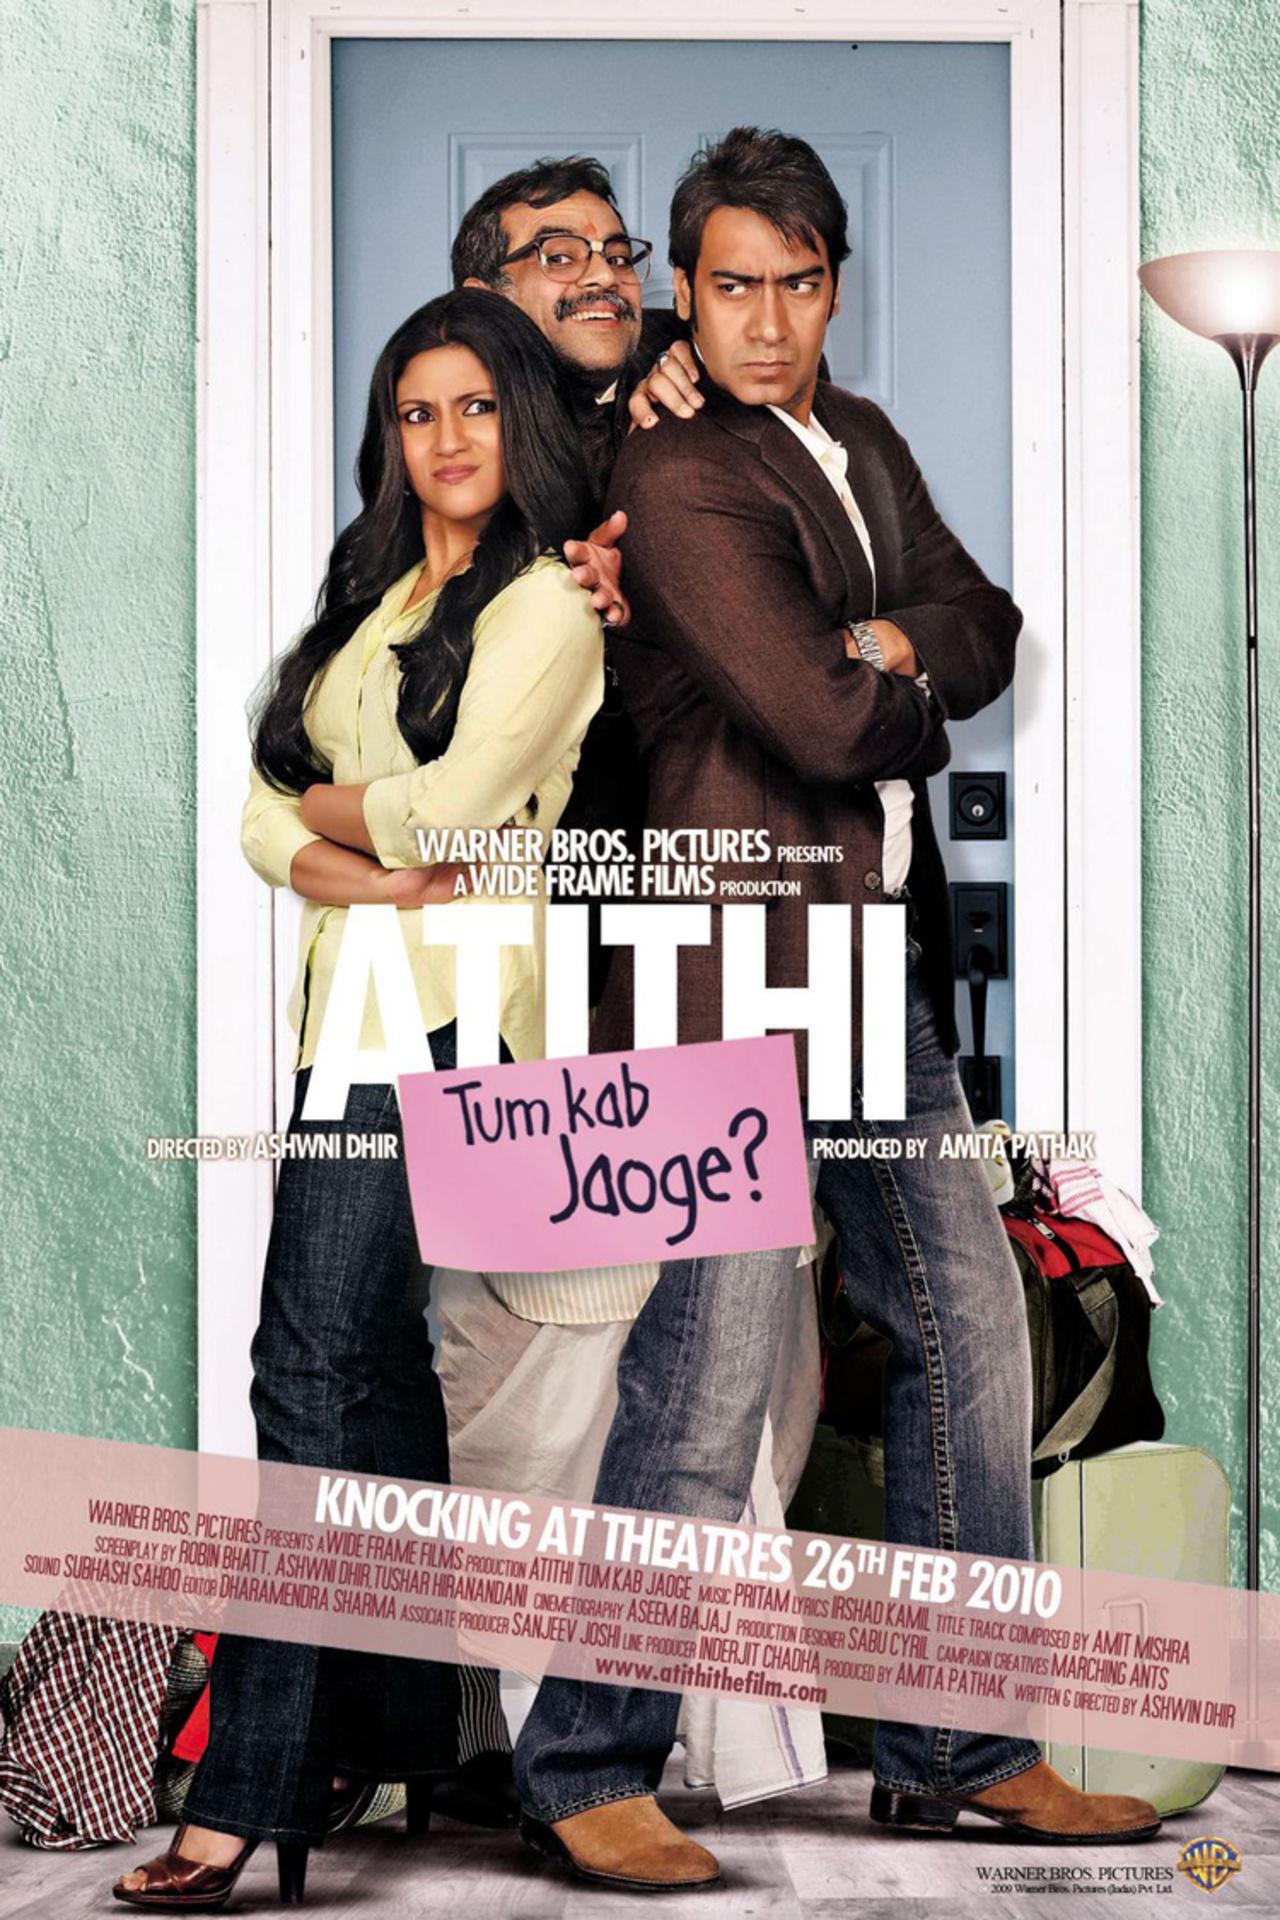 'Atithi Tum Kab Jaoge?' is a delightful Indian comedy film that revolves around the unexpected arrival of an unwanted houseguest, portrayed by the legendary actor Paresh Rawal, into the lives of a middle-class couple, played by Ajay Devgn and Konkona Sen Sharma